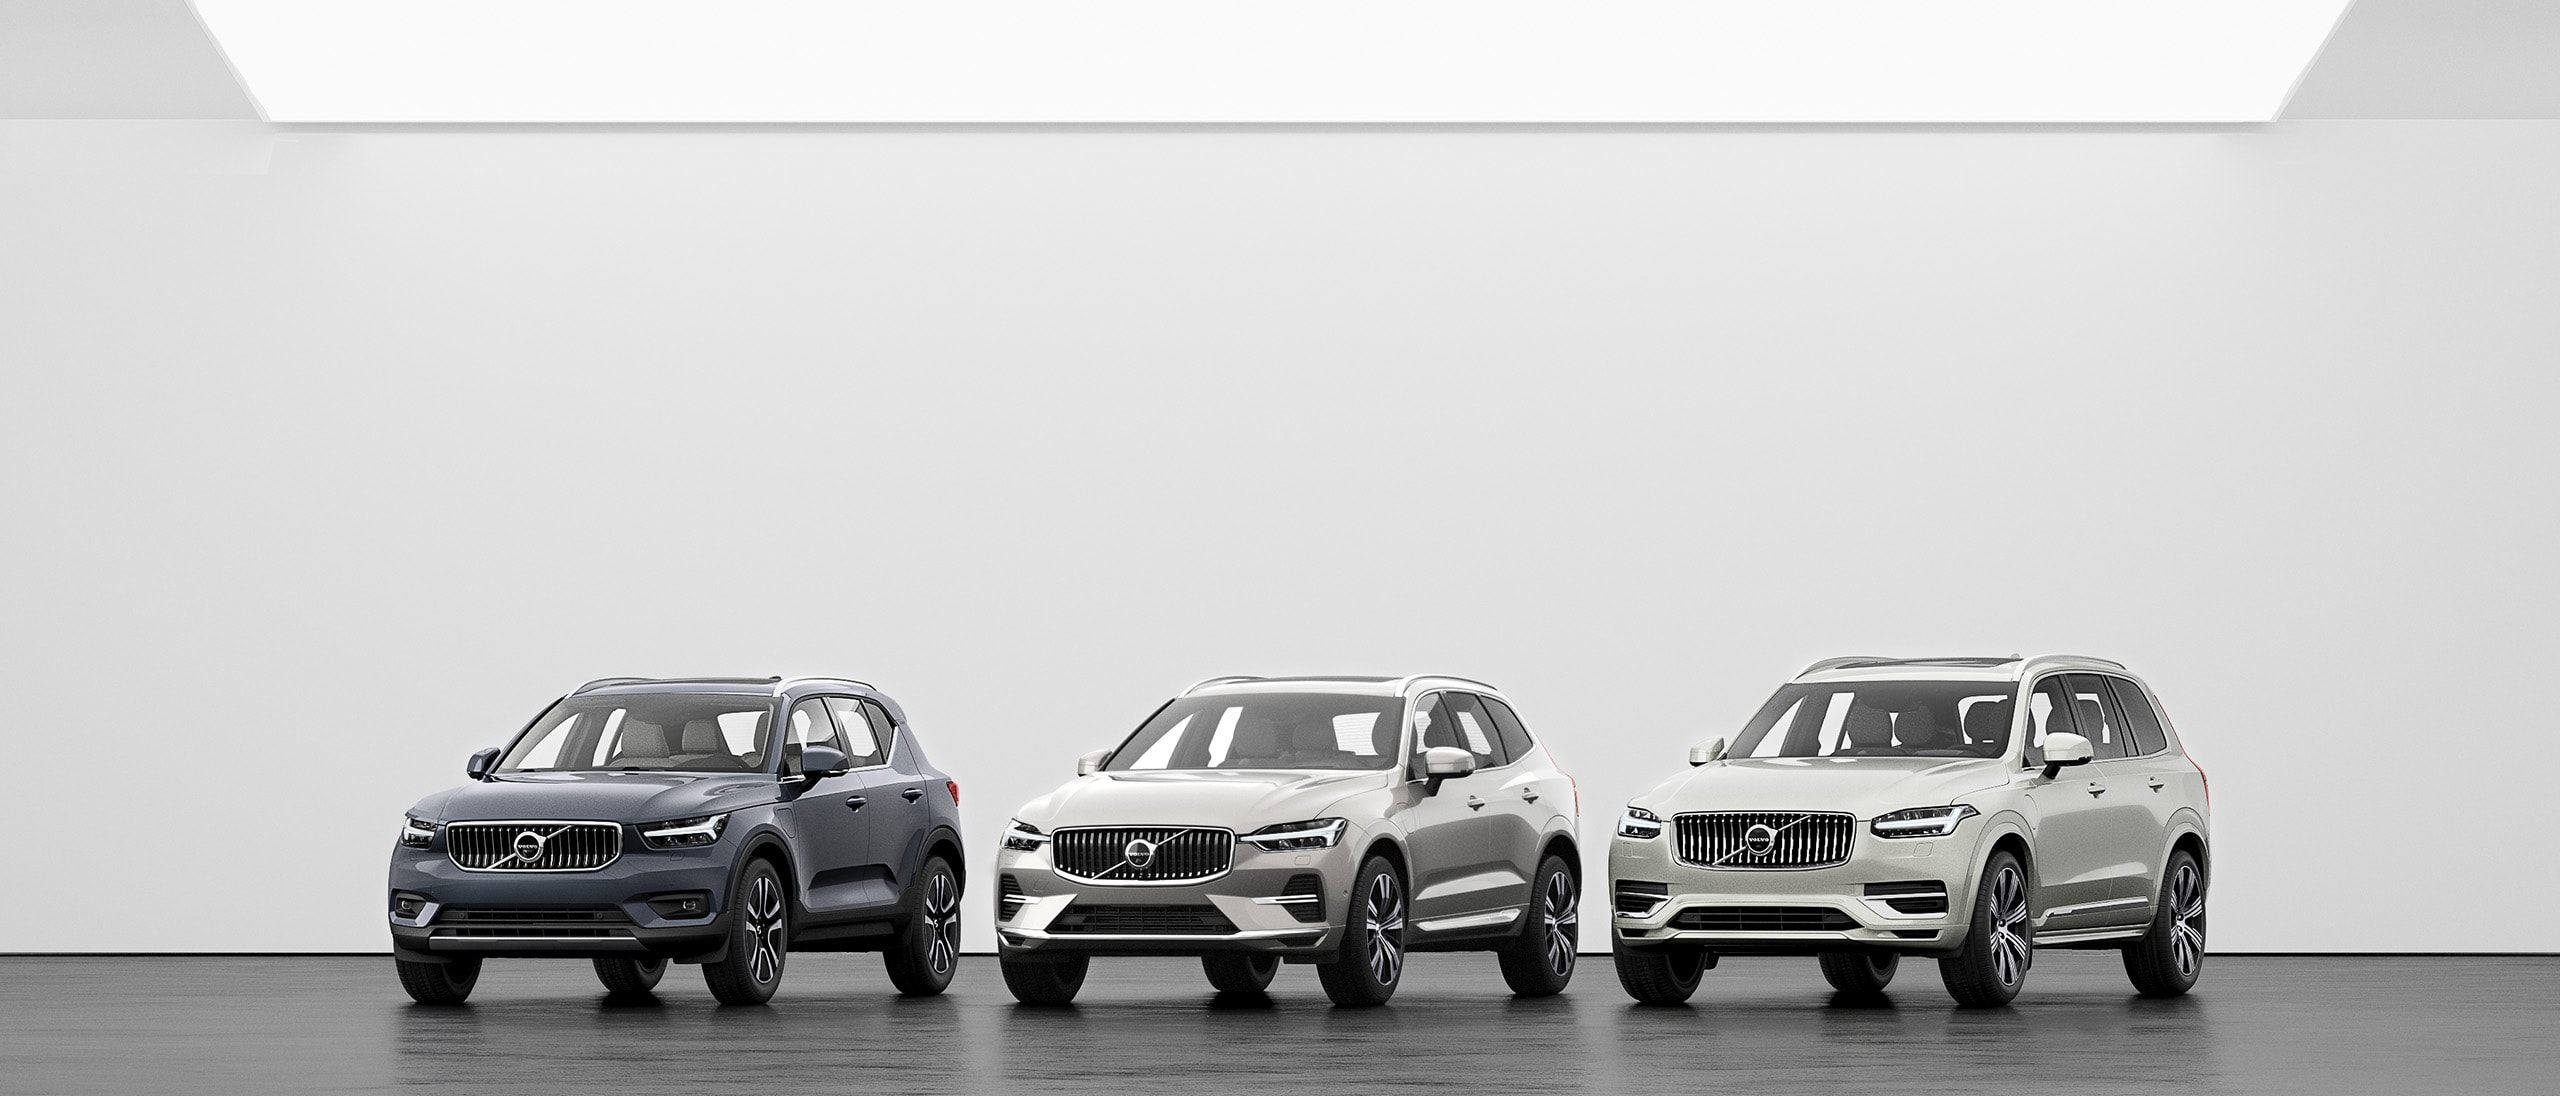 A lineup of Volvo SUVs, XC40, XC60 and XC90 on a grey floor.